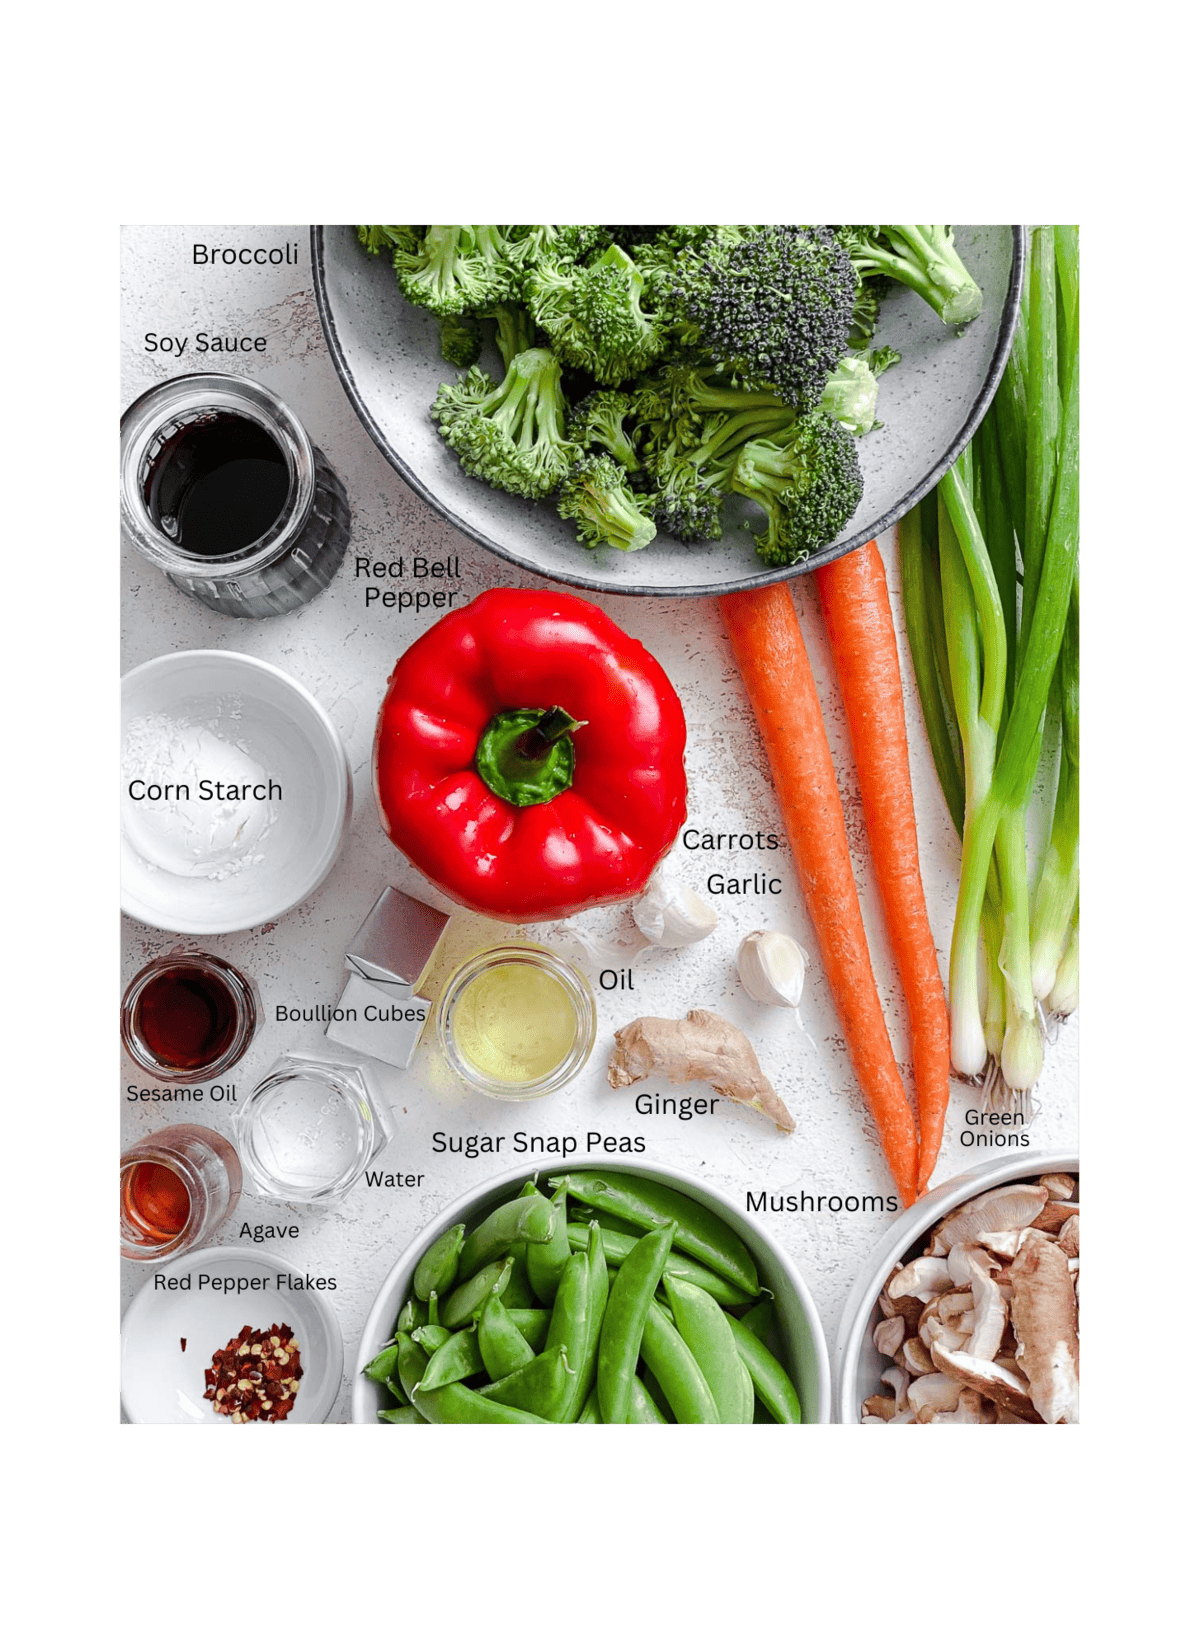 ingredients for Easy Stir-Fry Vegetables measured out against a white surface